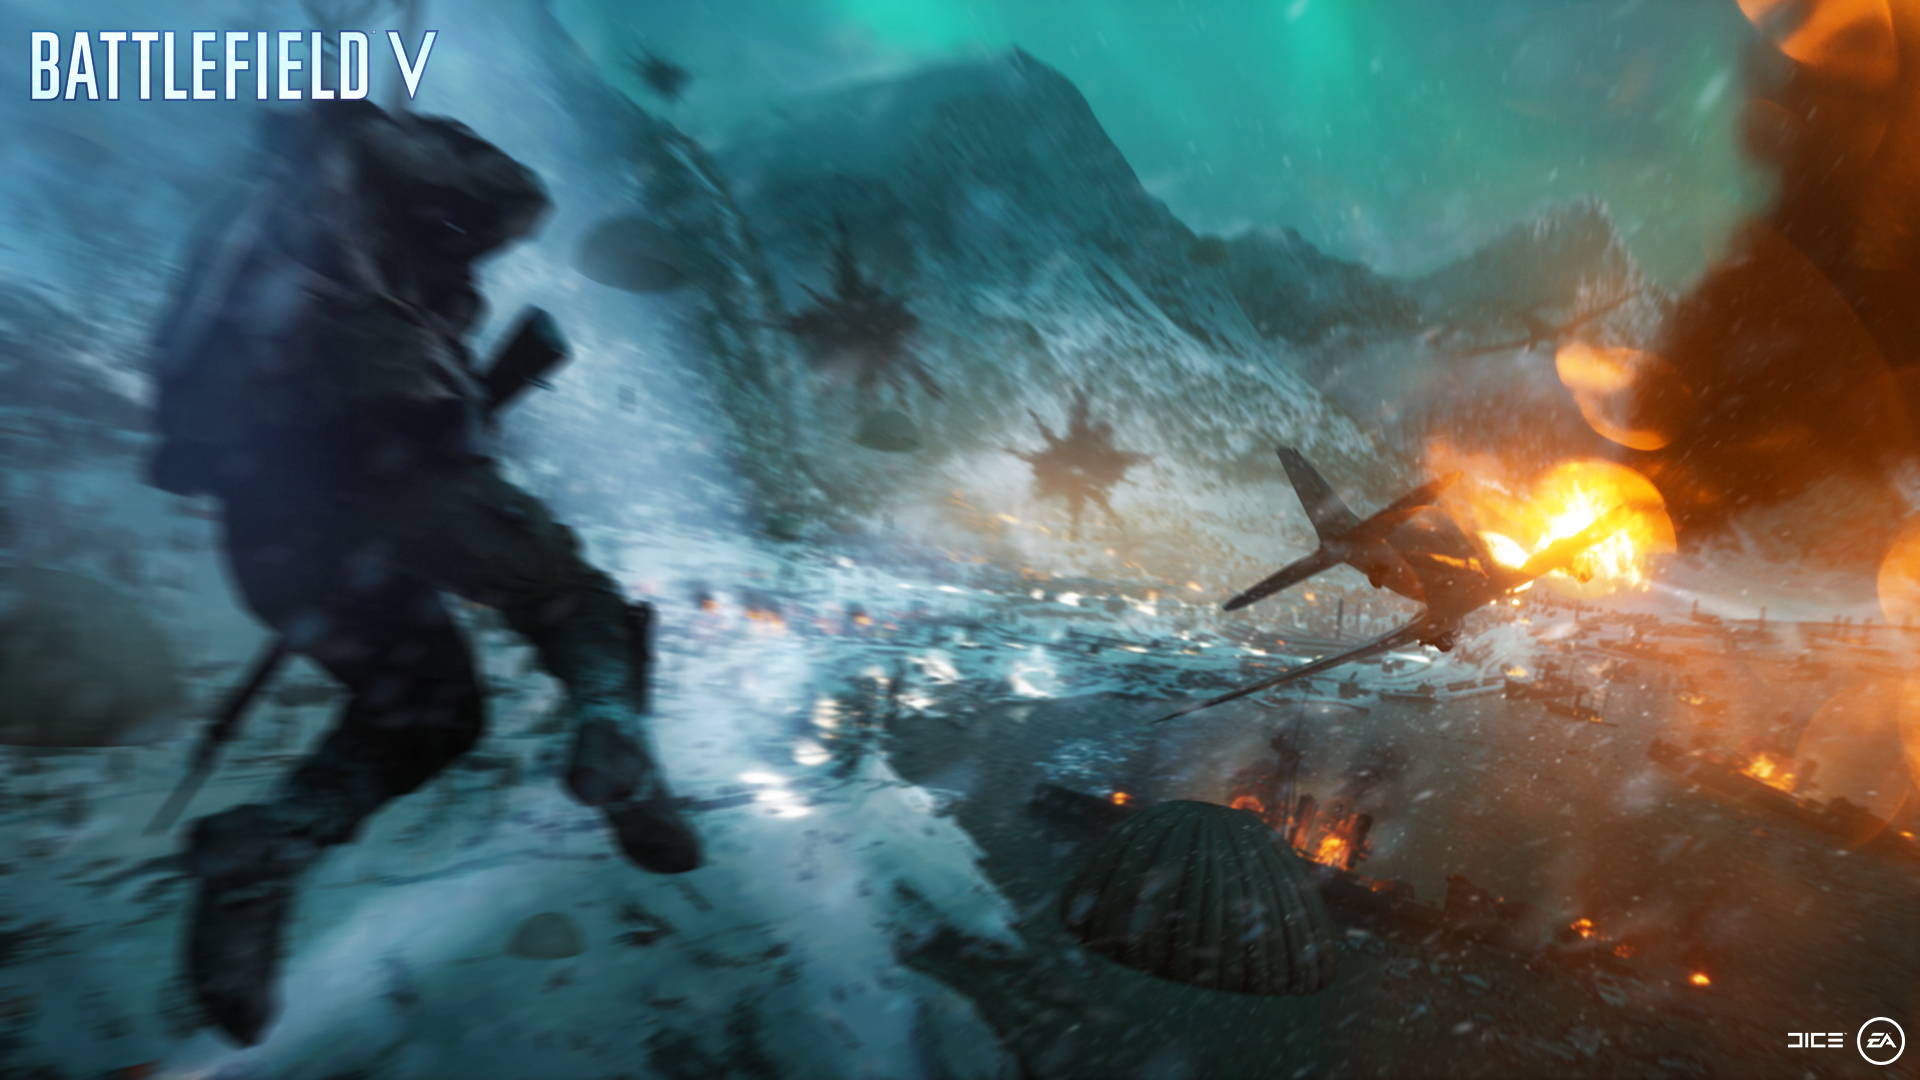 Battlefield 5 review: Breathtaking, disappointing, and encouraging